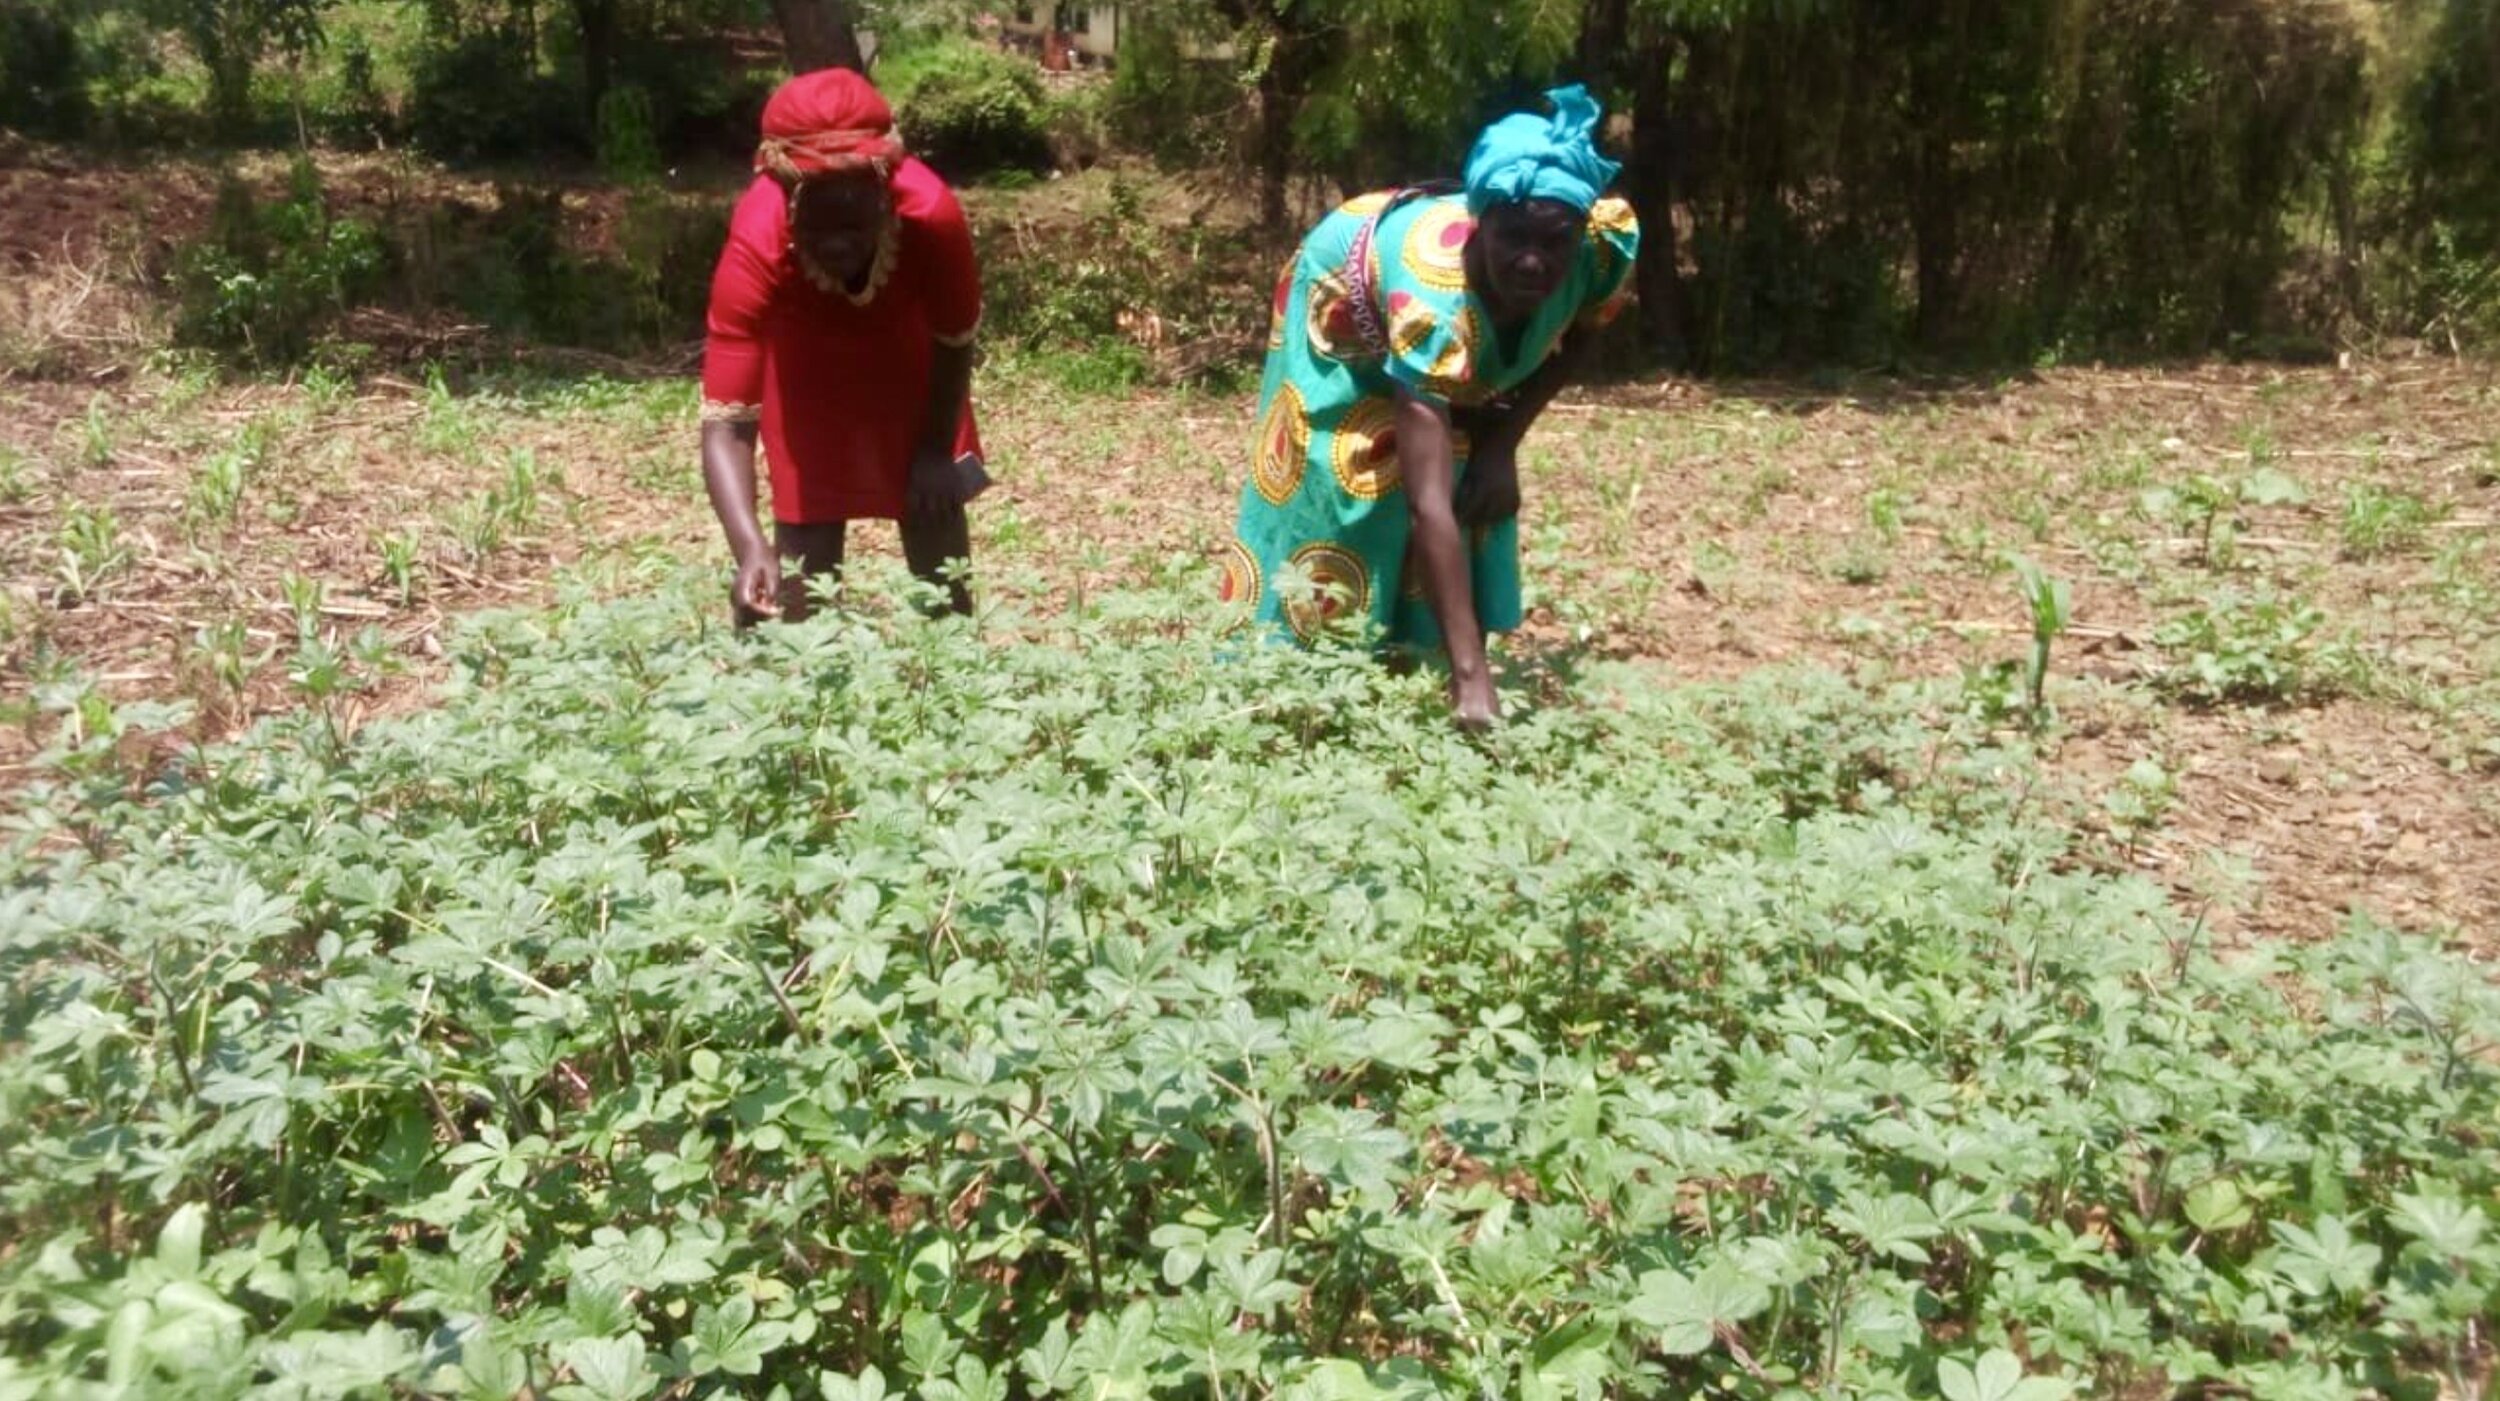  The vegetables have offered the widows an additional source of income as many have surplus. 